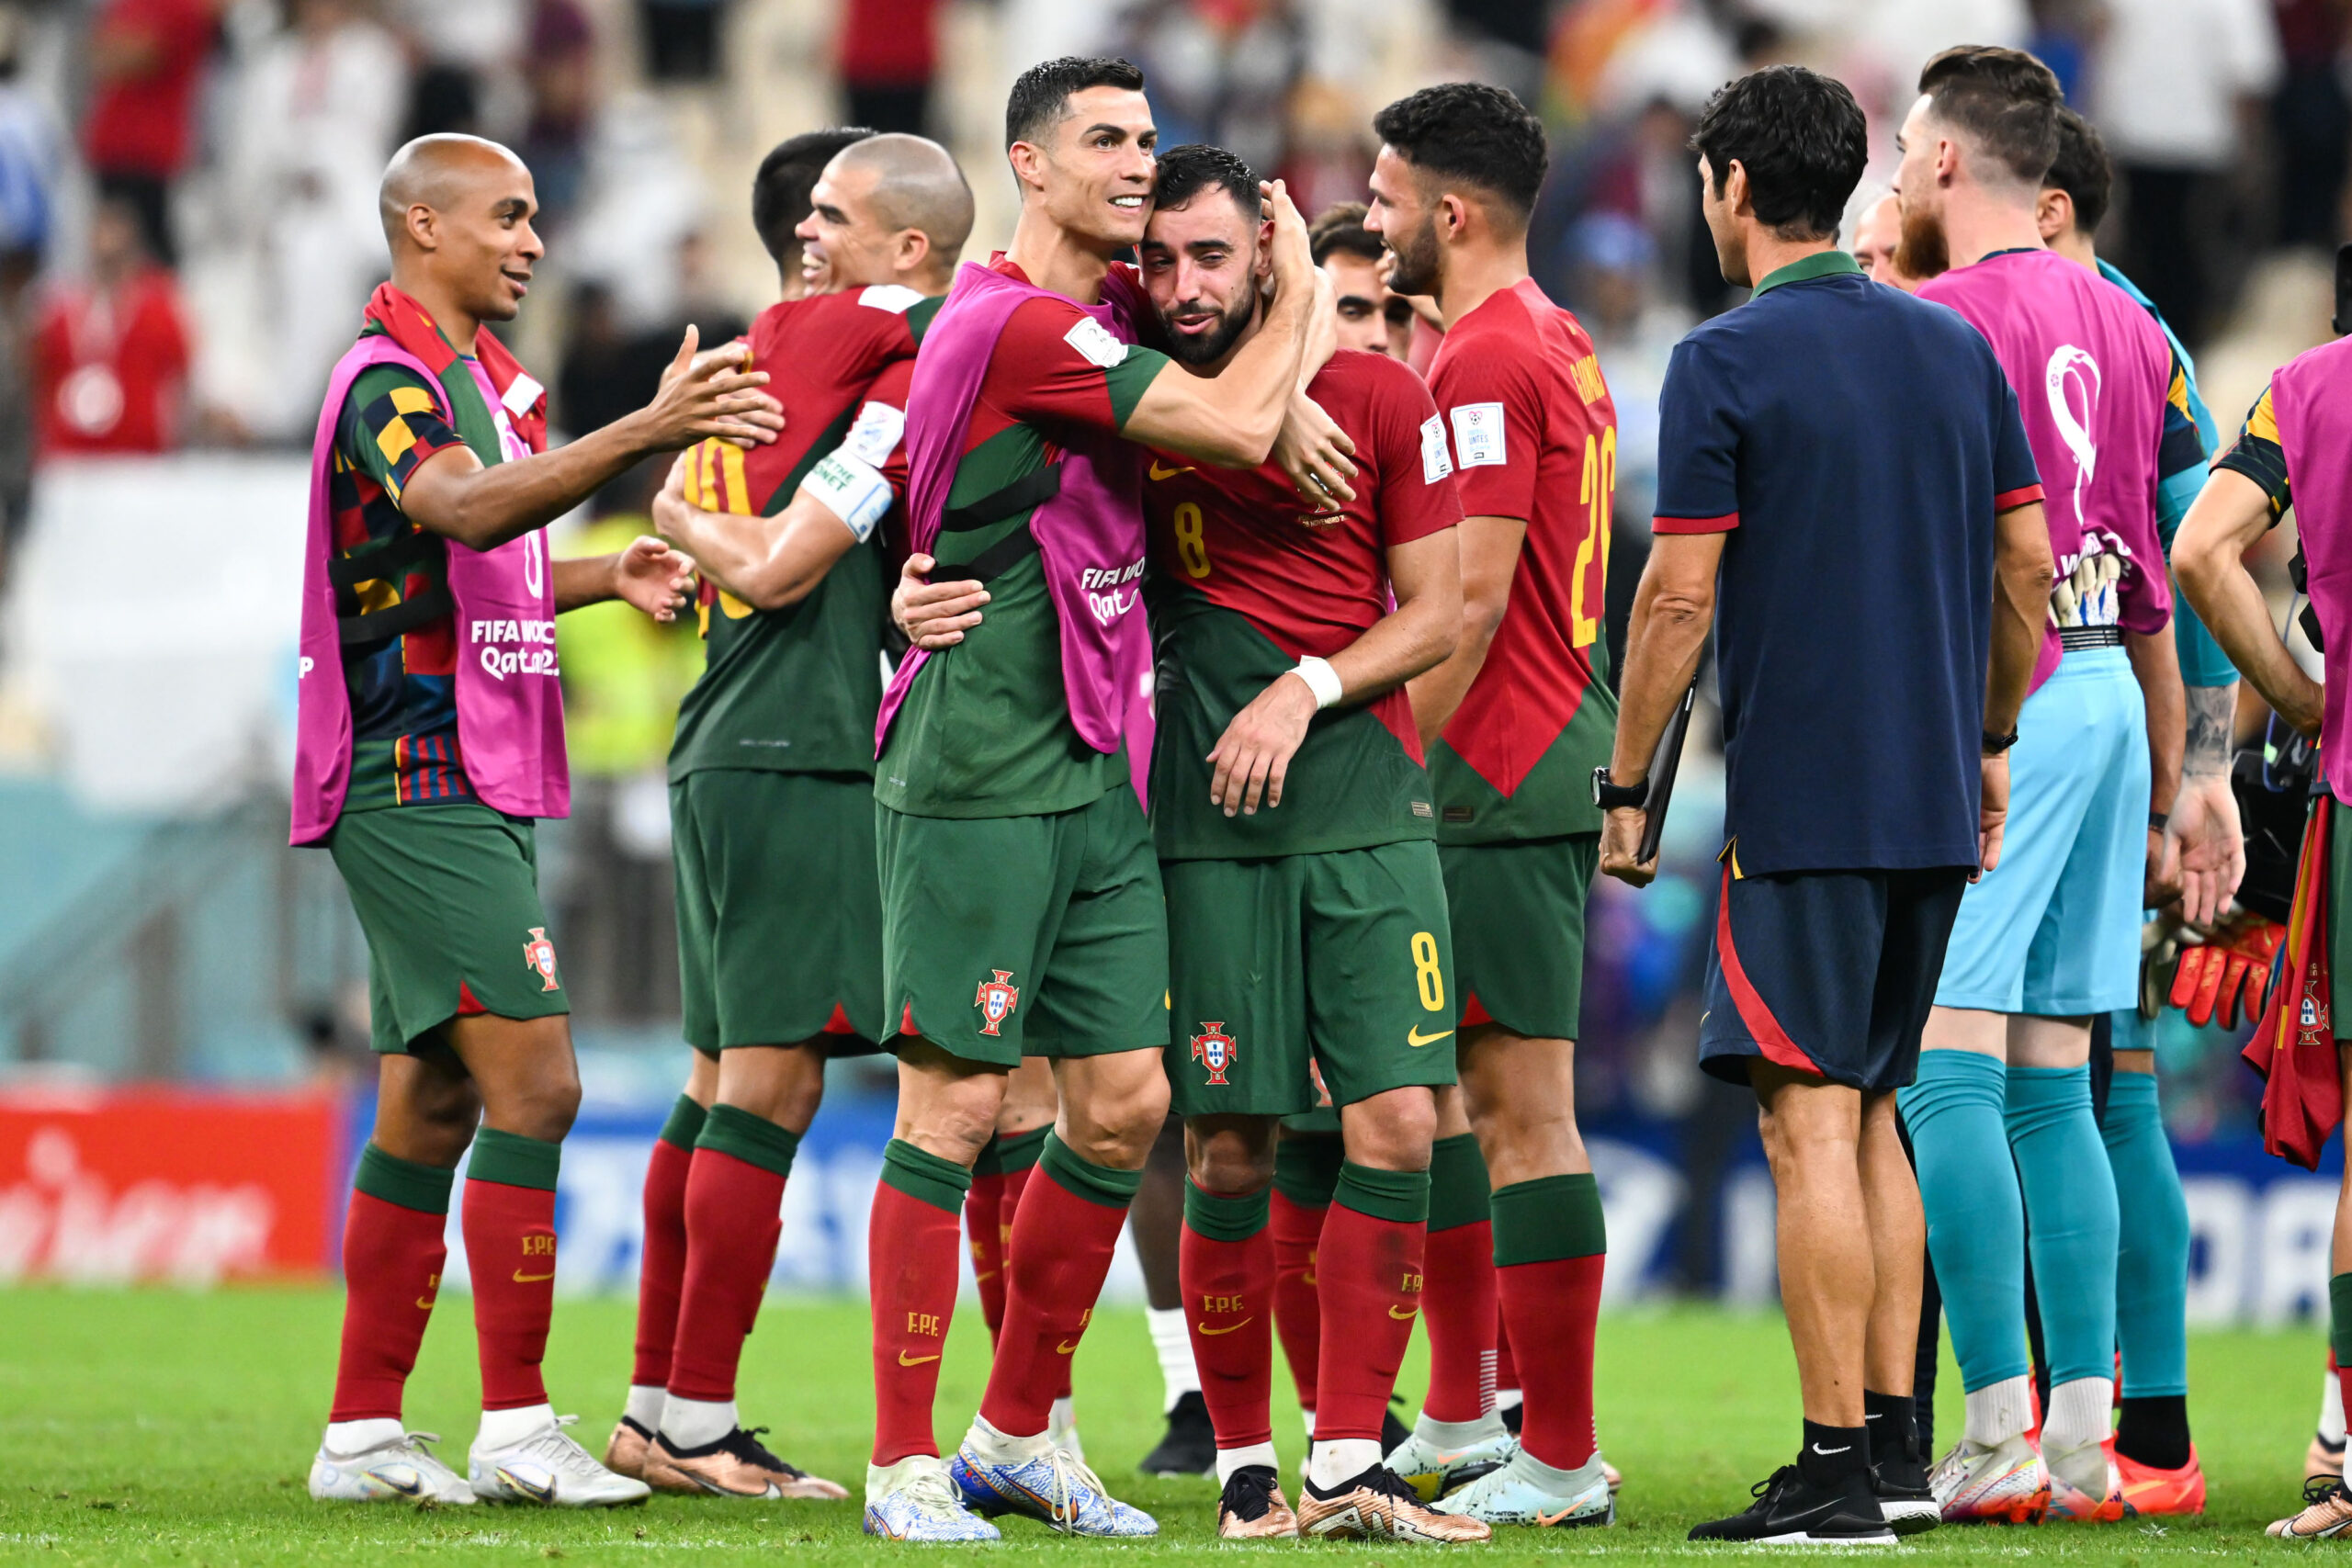 Portugal qualifies for knockout with revenge against Uruguay